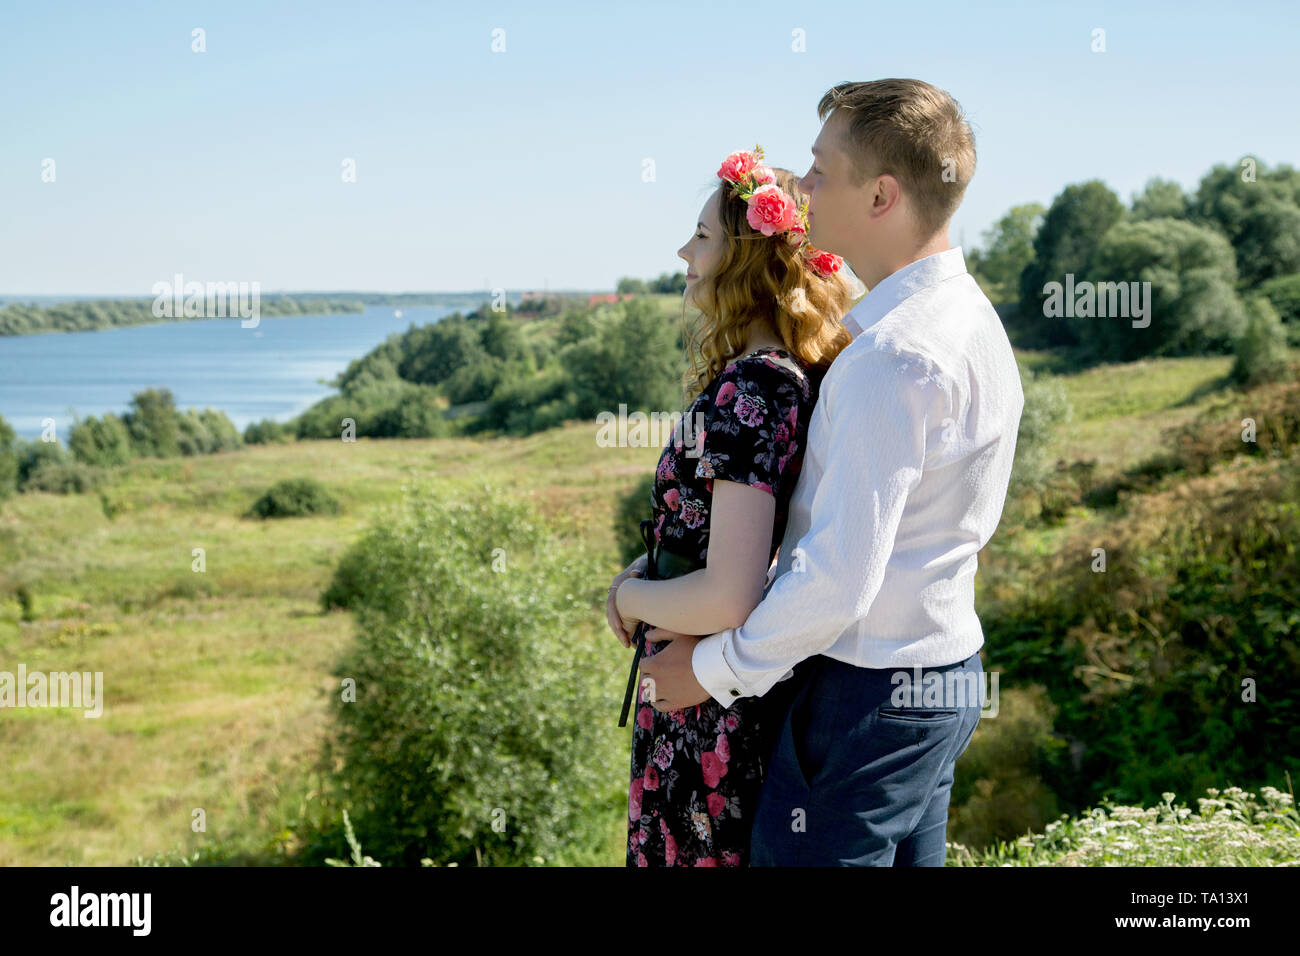 girl and boy hugging on a high bank of the river on a summer day Stock Photo